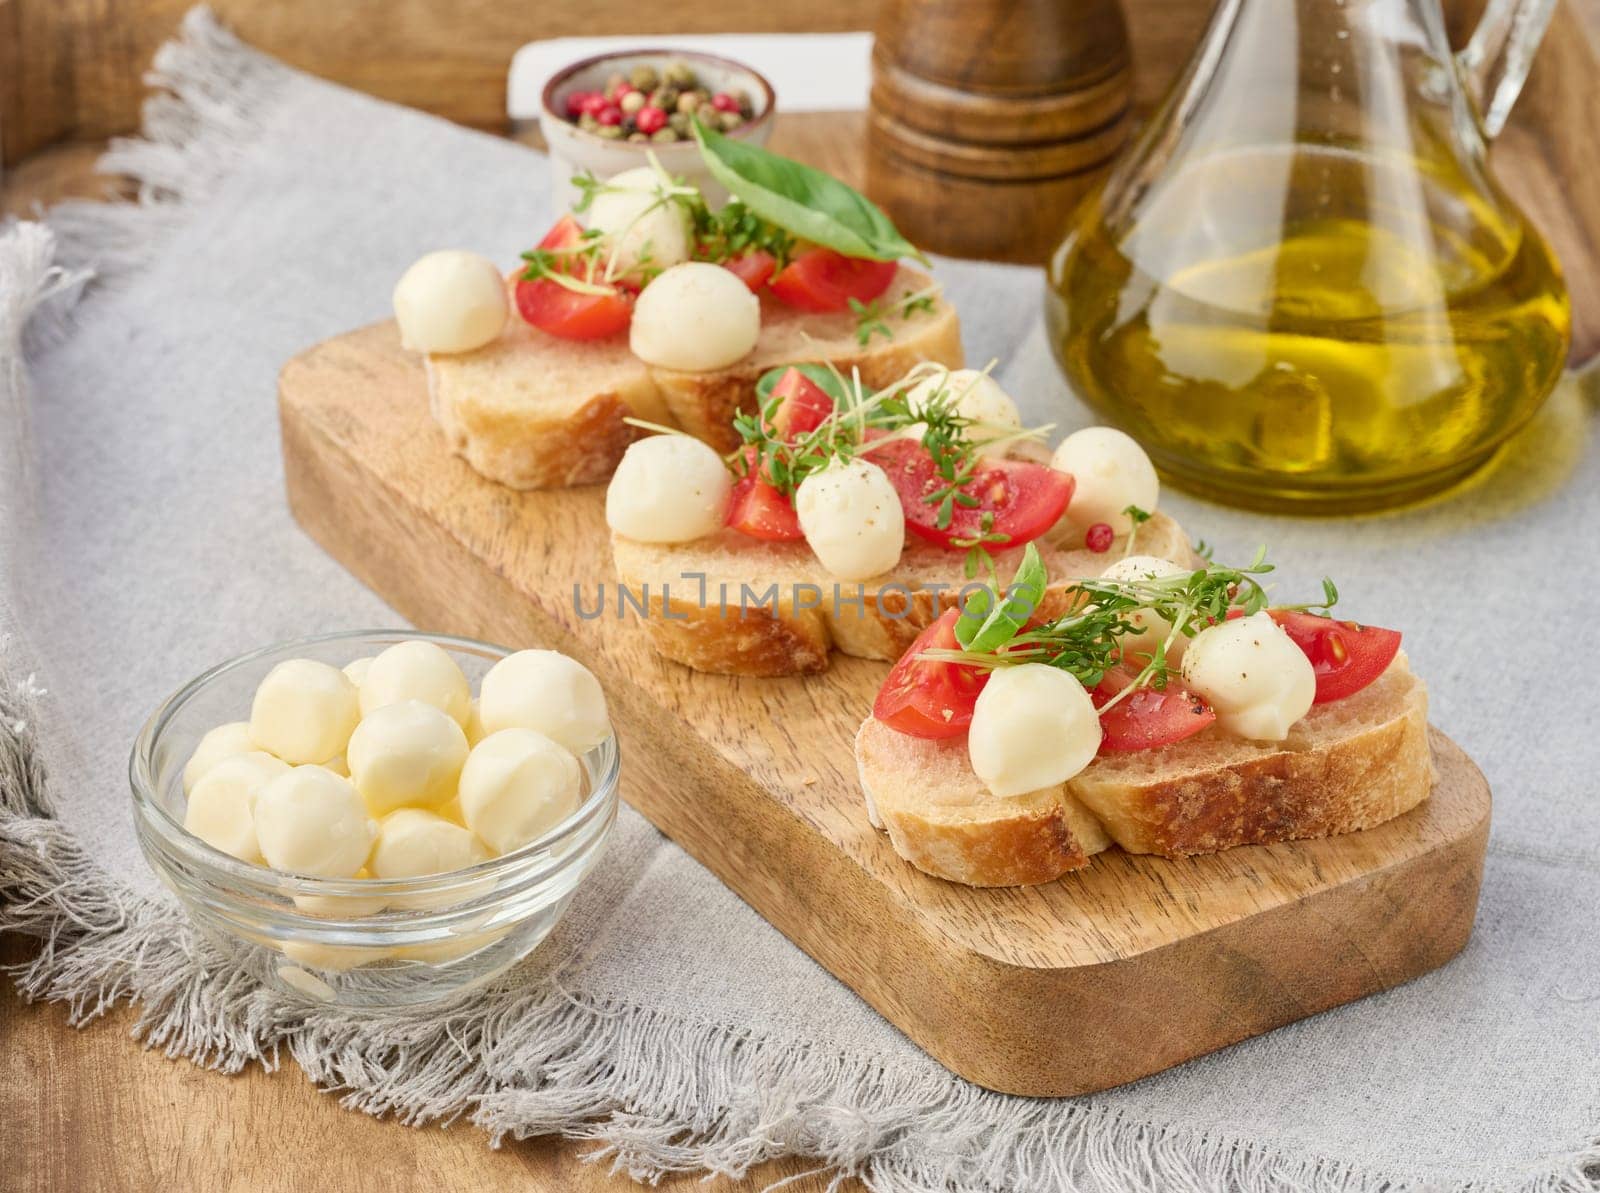 Round mozzarella, cherry tomatoes and microgreens on a piece of white bread, a healthy sandwich by ndanko